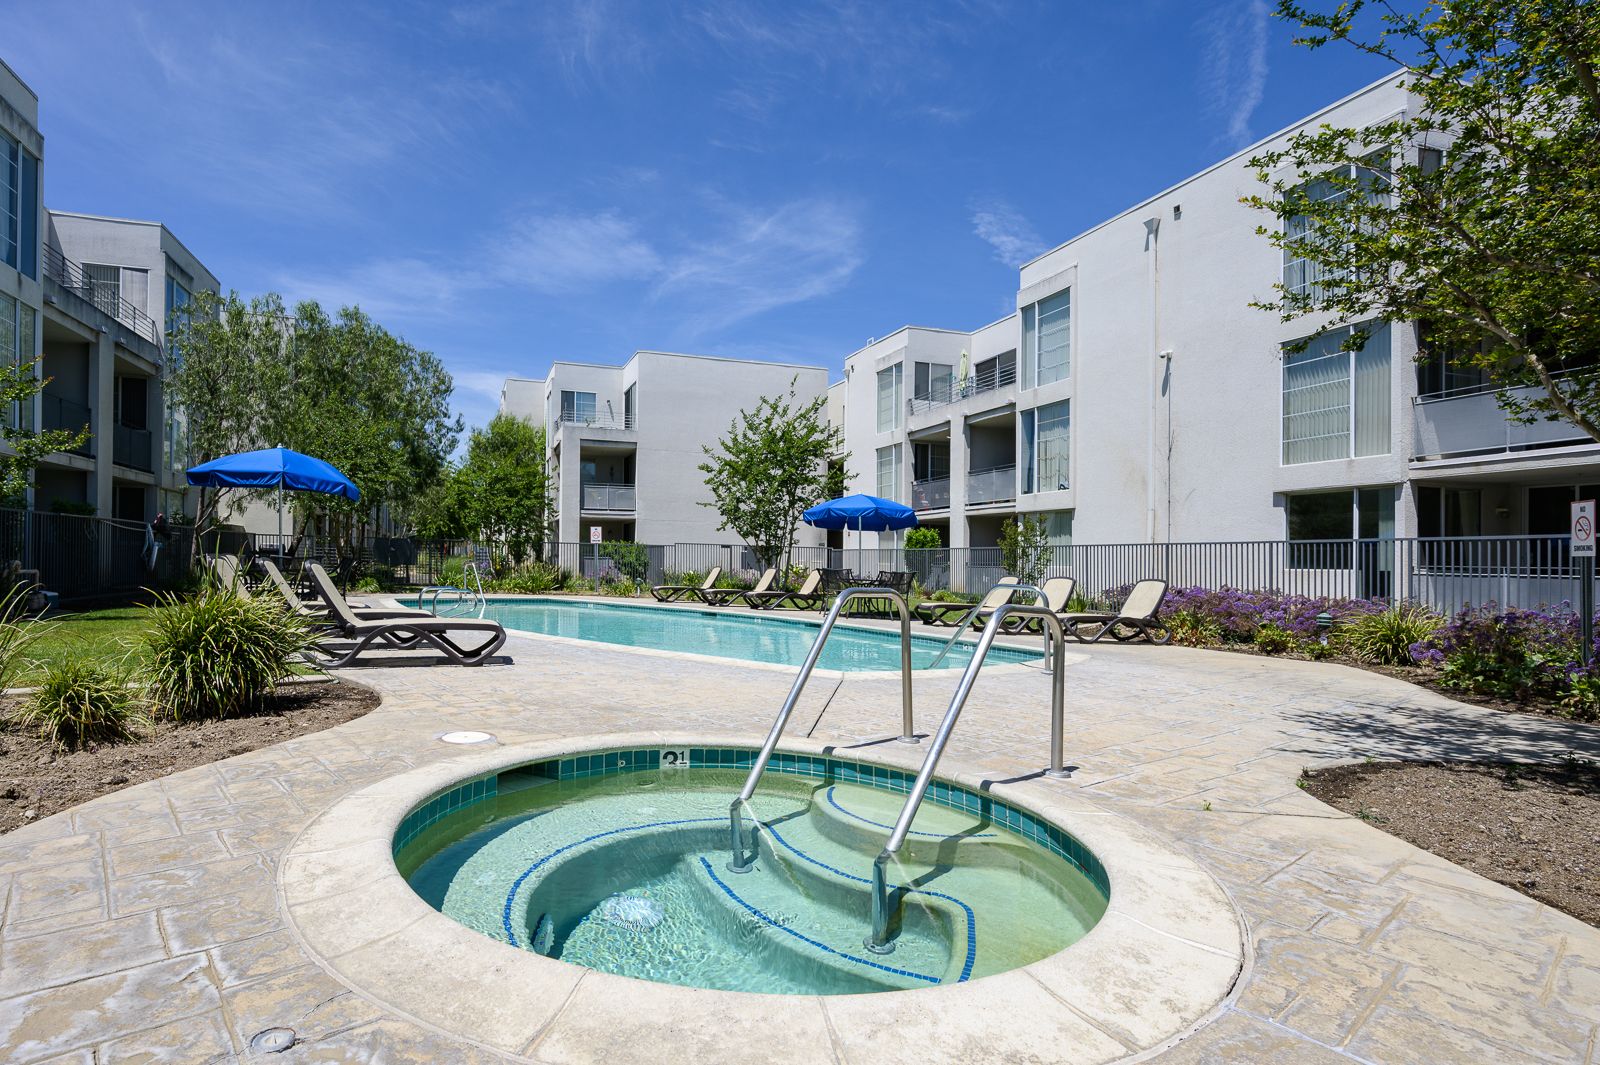 Gated pool area with twelve lounge chairs, two patio tables with umbrellas, and a 3.5 feet deep jacuzzi.